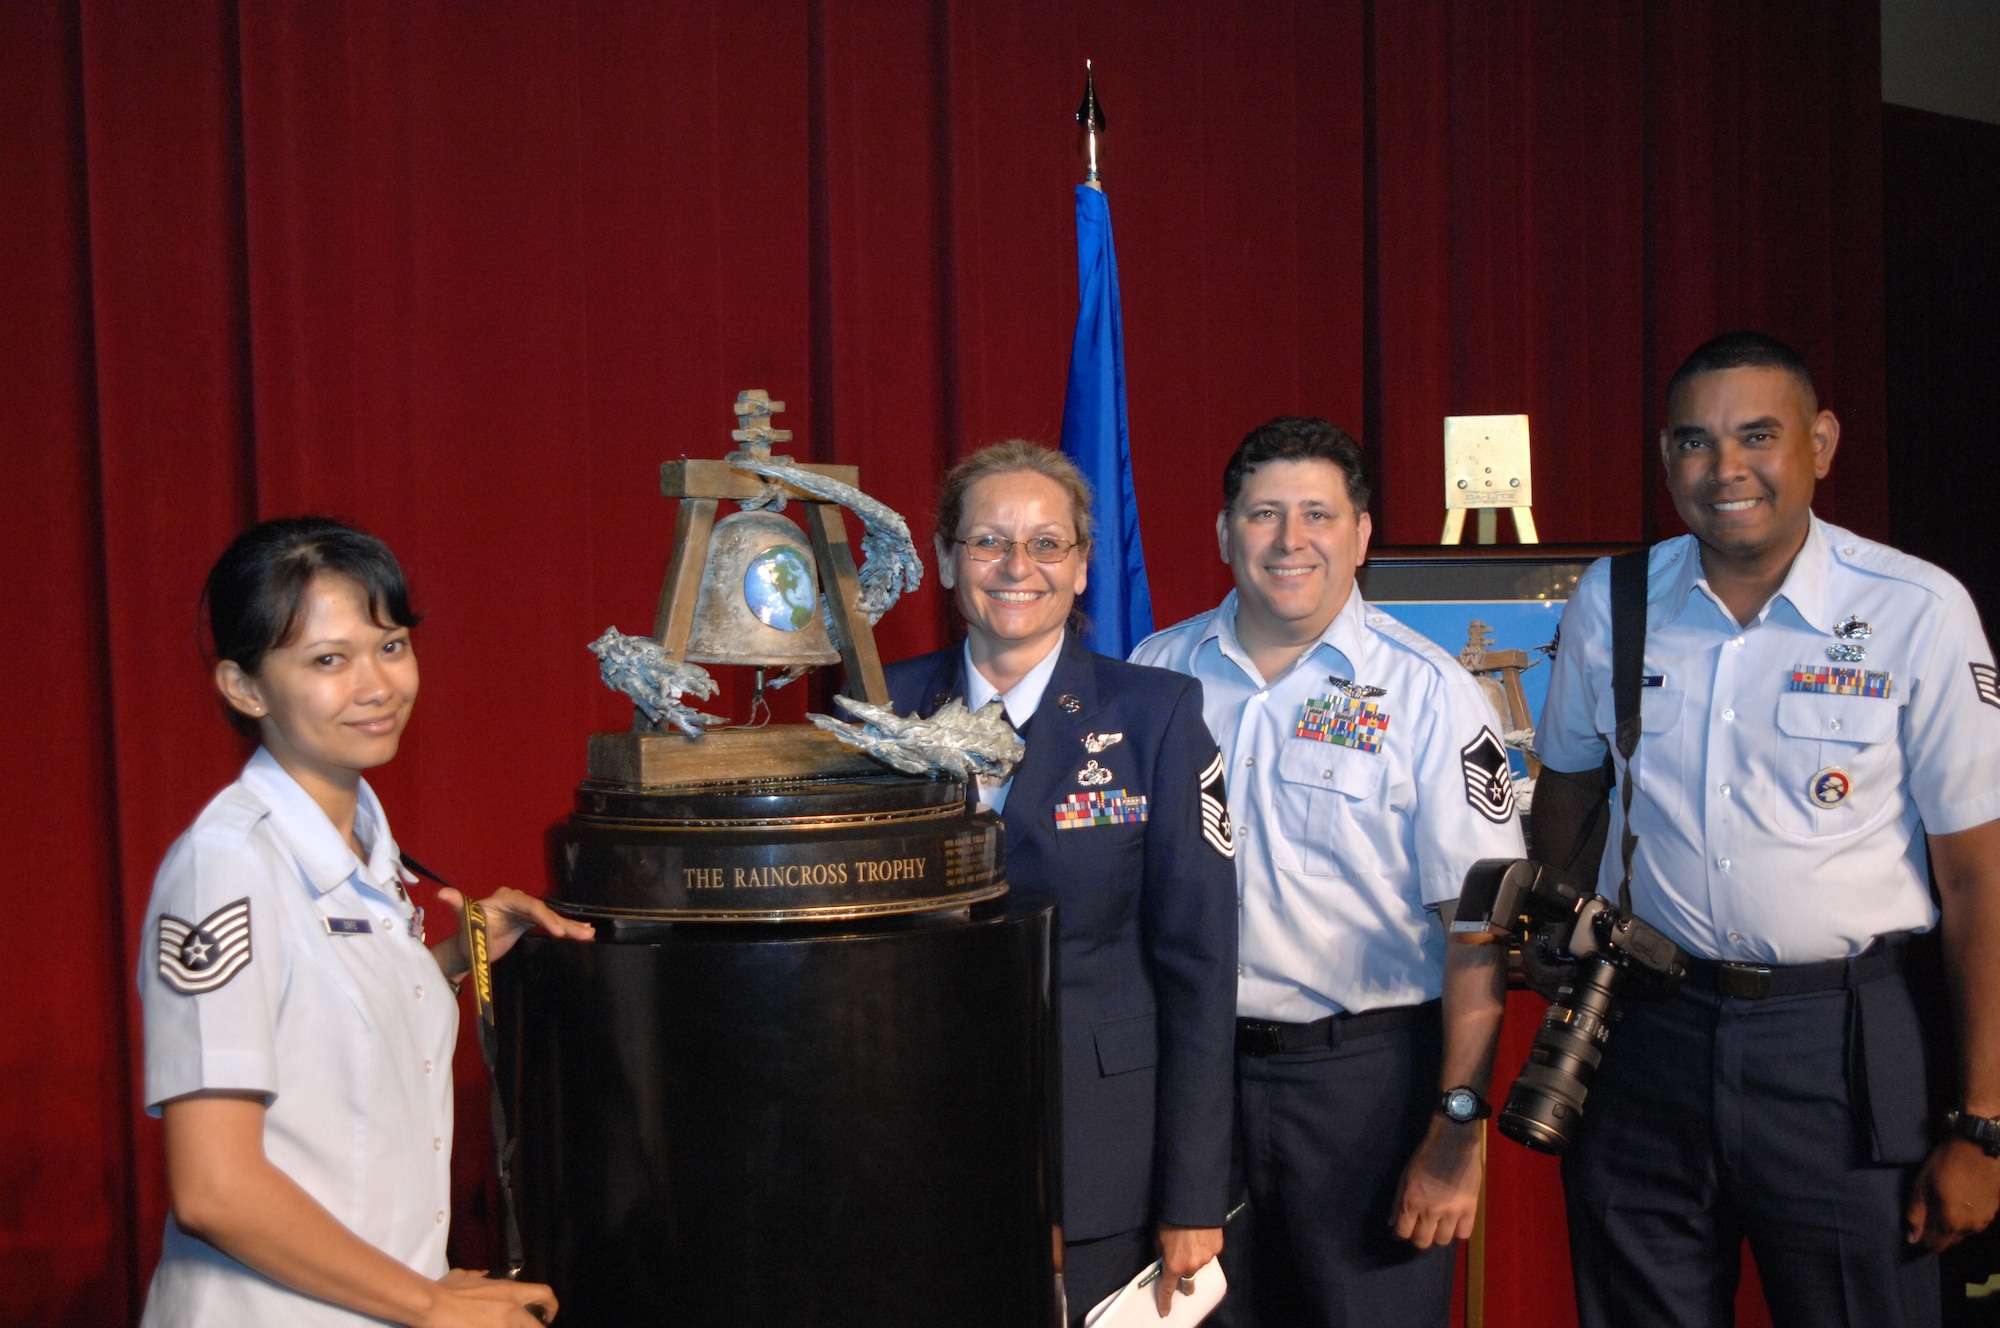 From left to right, Technical Sgt. Carolyn Erfe, Senior Mater Sgt. Kim Allain, Master Sgt. Roy Santana, and Technical Sgt. Keith Lawson, photographers with the 4th Combat Camera Squadron, March Air Reserve Base, Calif., pose with the Raincross Trophy after it was awarded to the 452nd Air Mobility Wing, March ARB, Calif, at the 11th Annual Raincross Trophy Dinner held July 23, 2009, at the Riverside Convention Center, Riverside, CA. Fourth Combat Camera is slated to administratively realign under the March wing in the near future.  (U. S. Air Force photo/ Senior Master Sgt. Kim Allain)  (released)